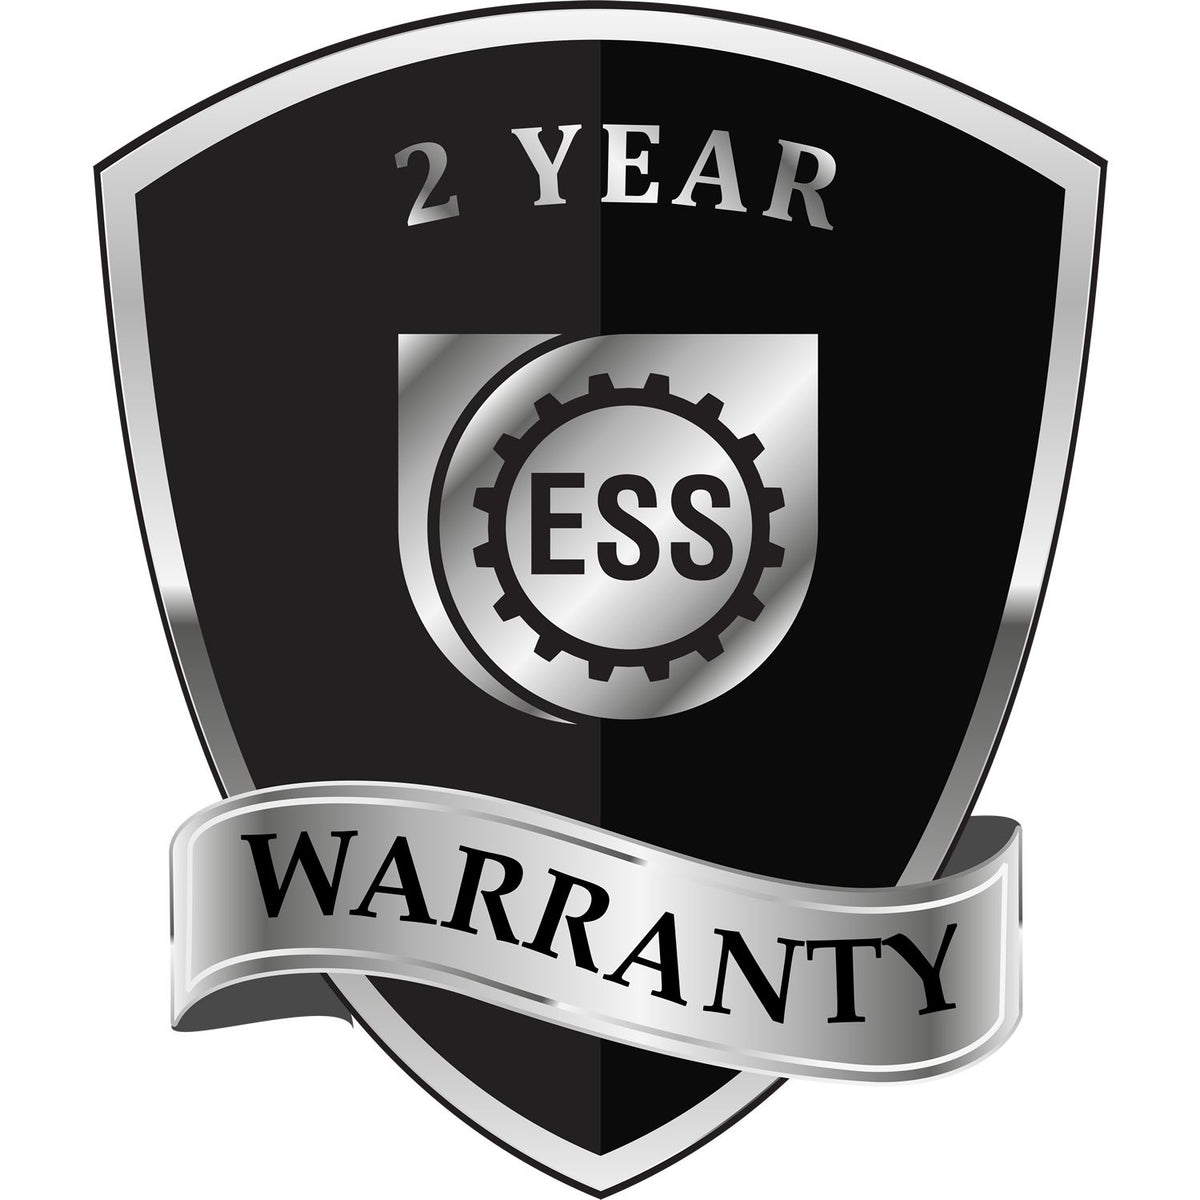 A black and silver badge or emblem showing warranty information for the Hybrid Arkansas Engineer Seal